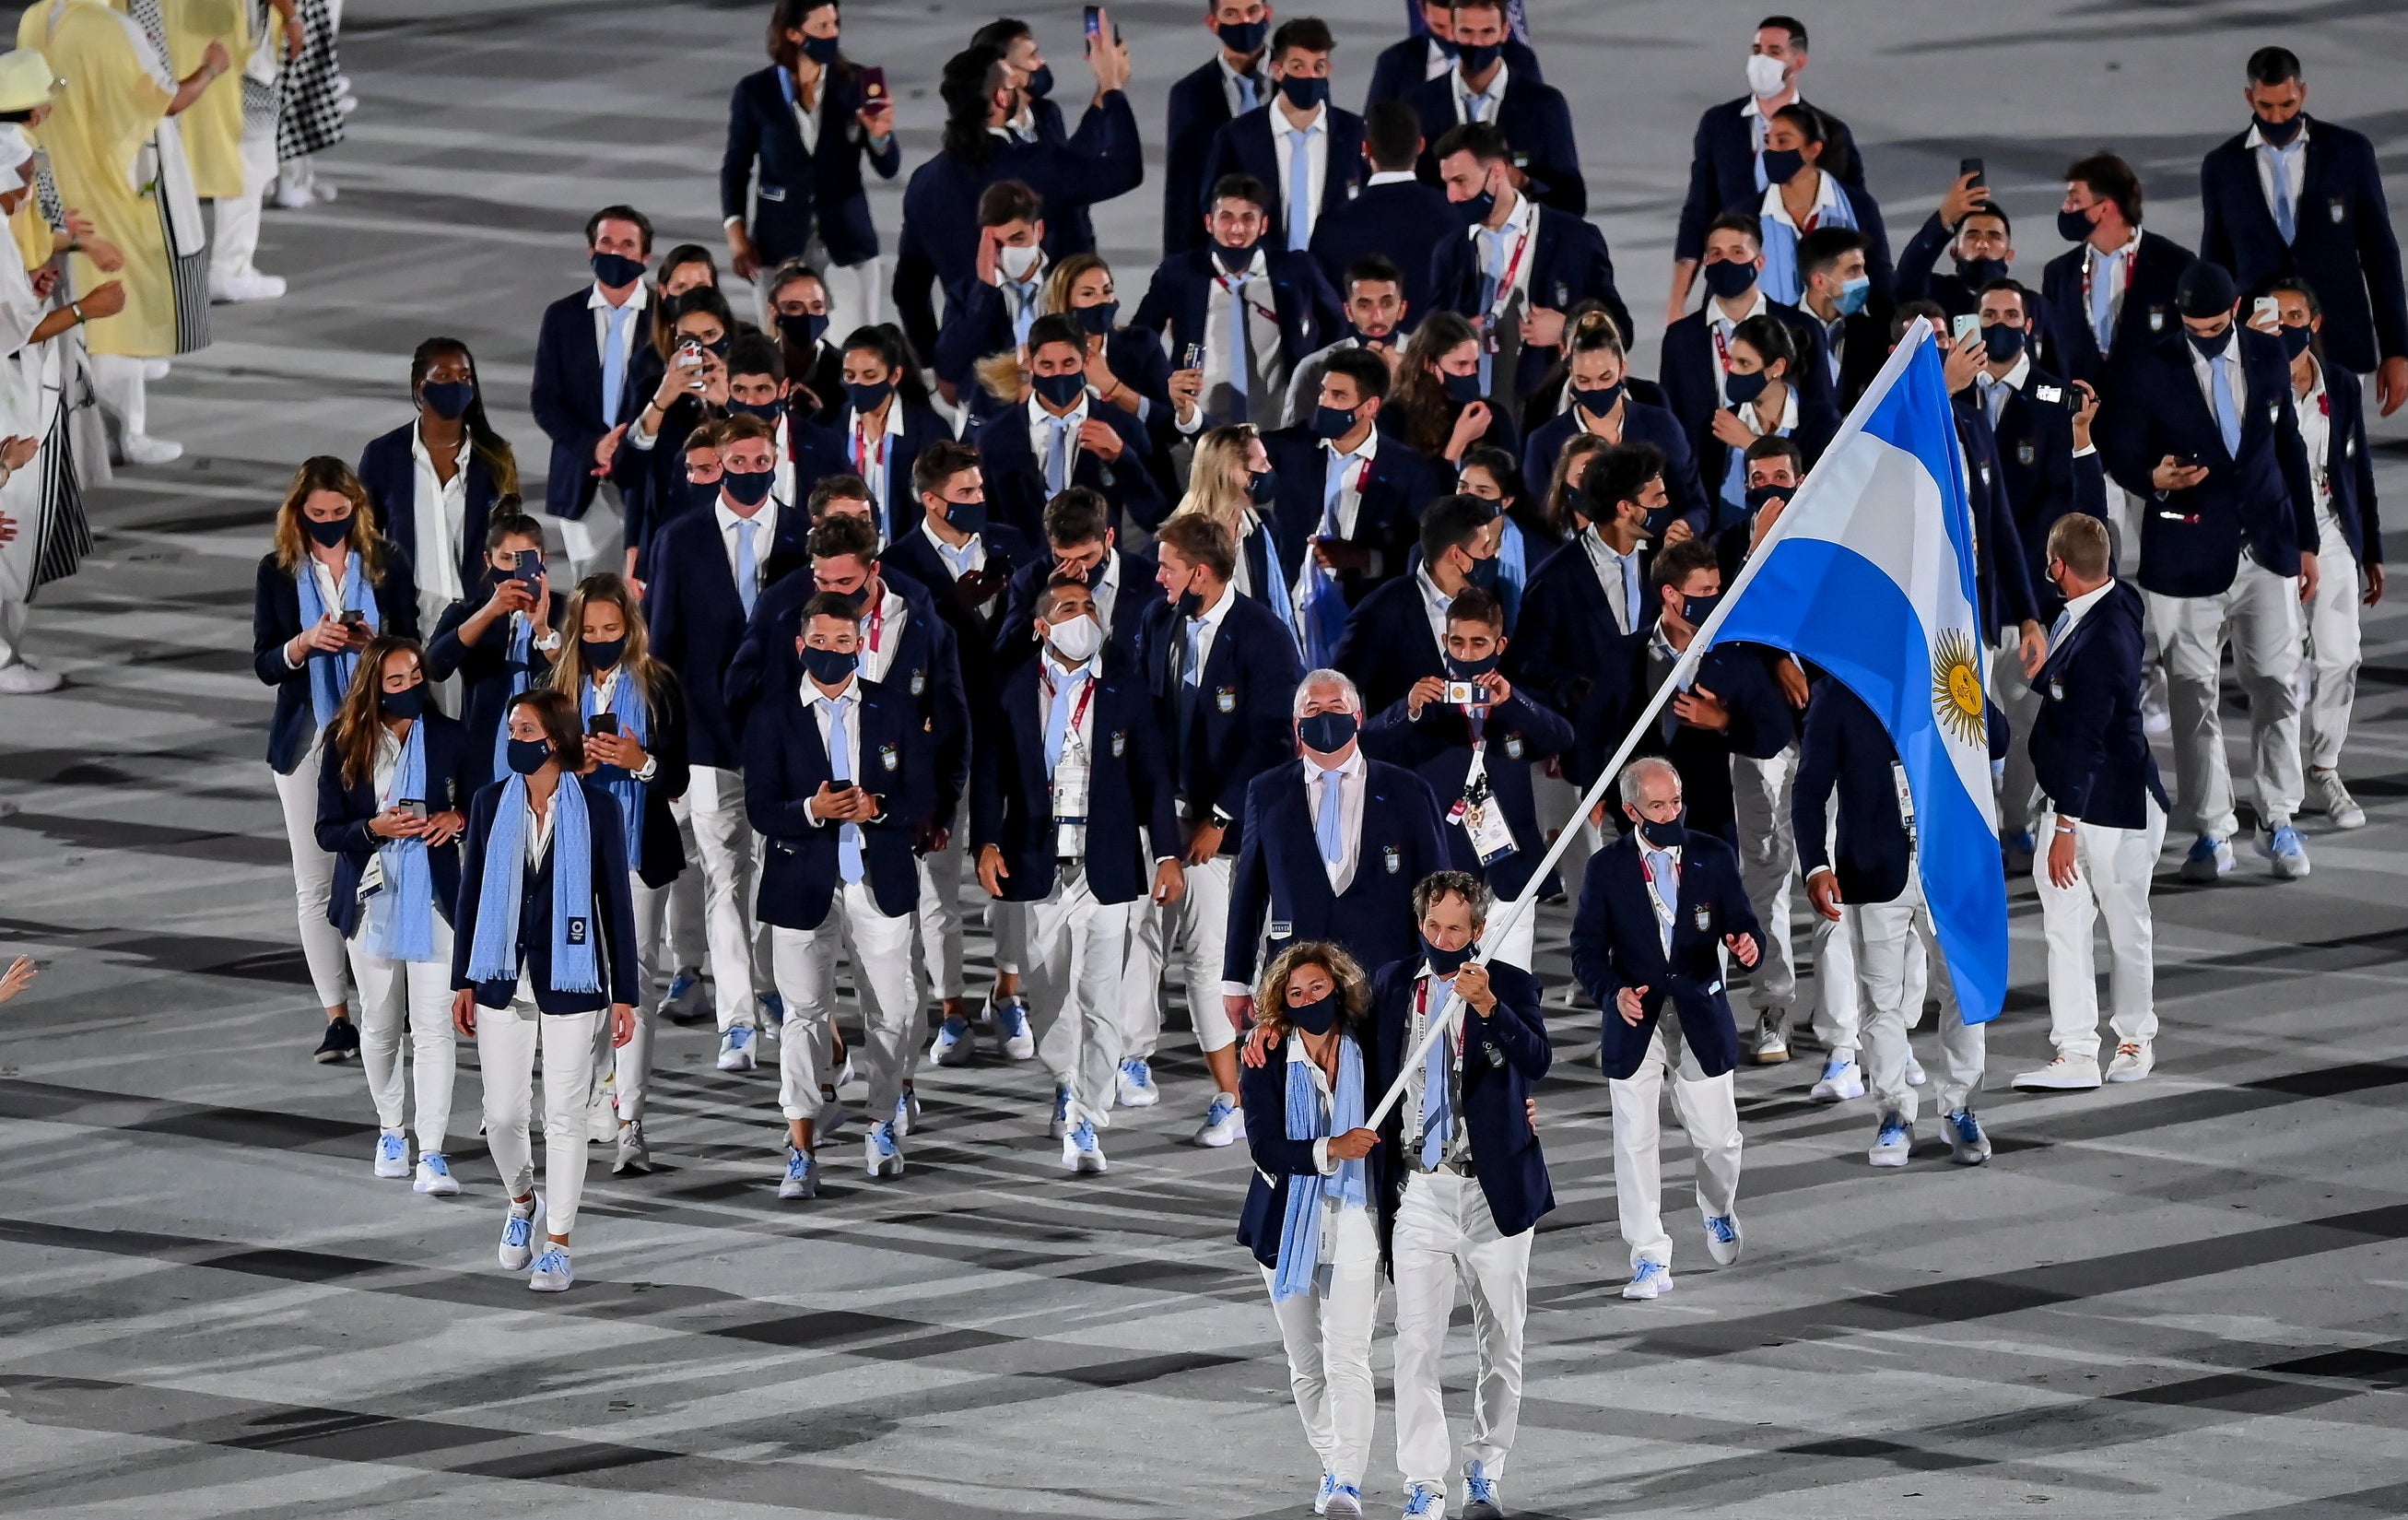 The Argentine athletes wore dark blazers and lights pants and sneakers